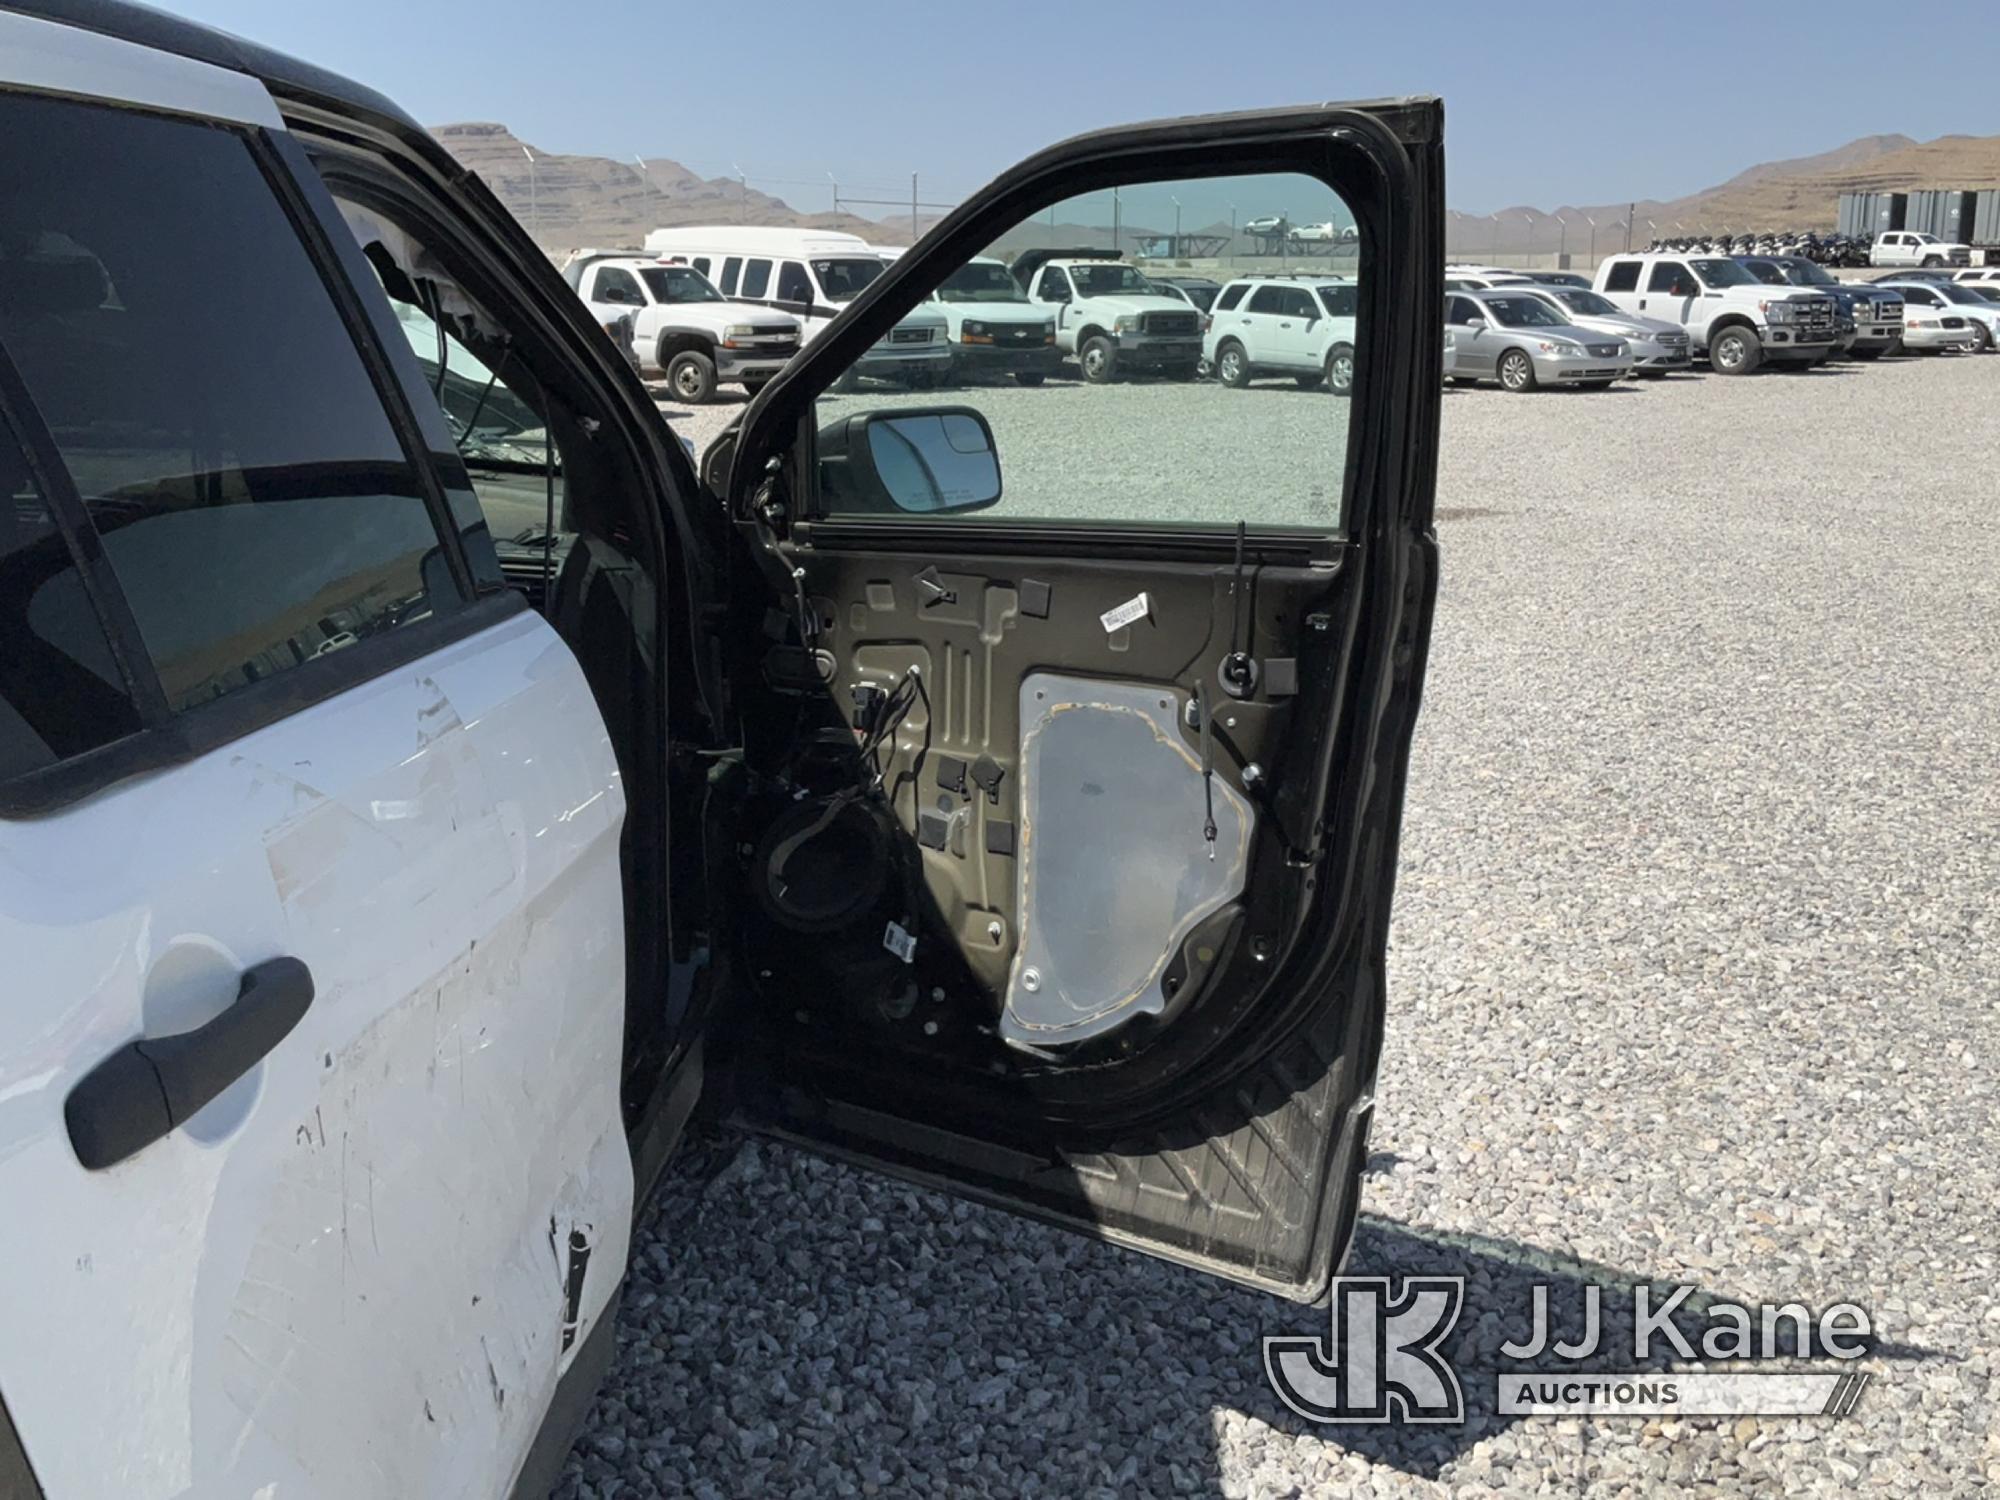 (Las Vegas, NV) 2018 Ford Explorer AWD Police Interceptor Dealers Only, Wrecked, Towed In, No Consol